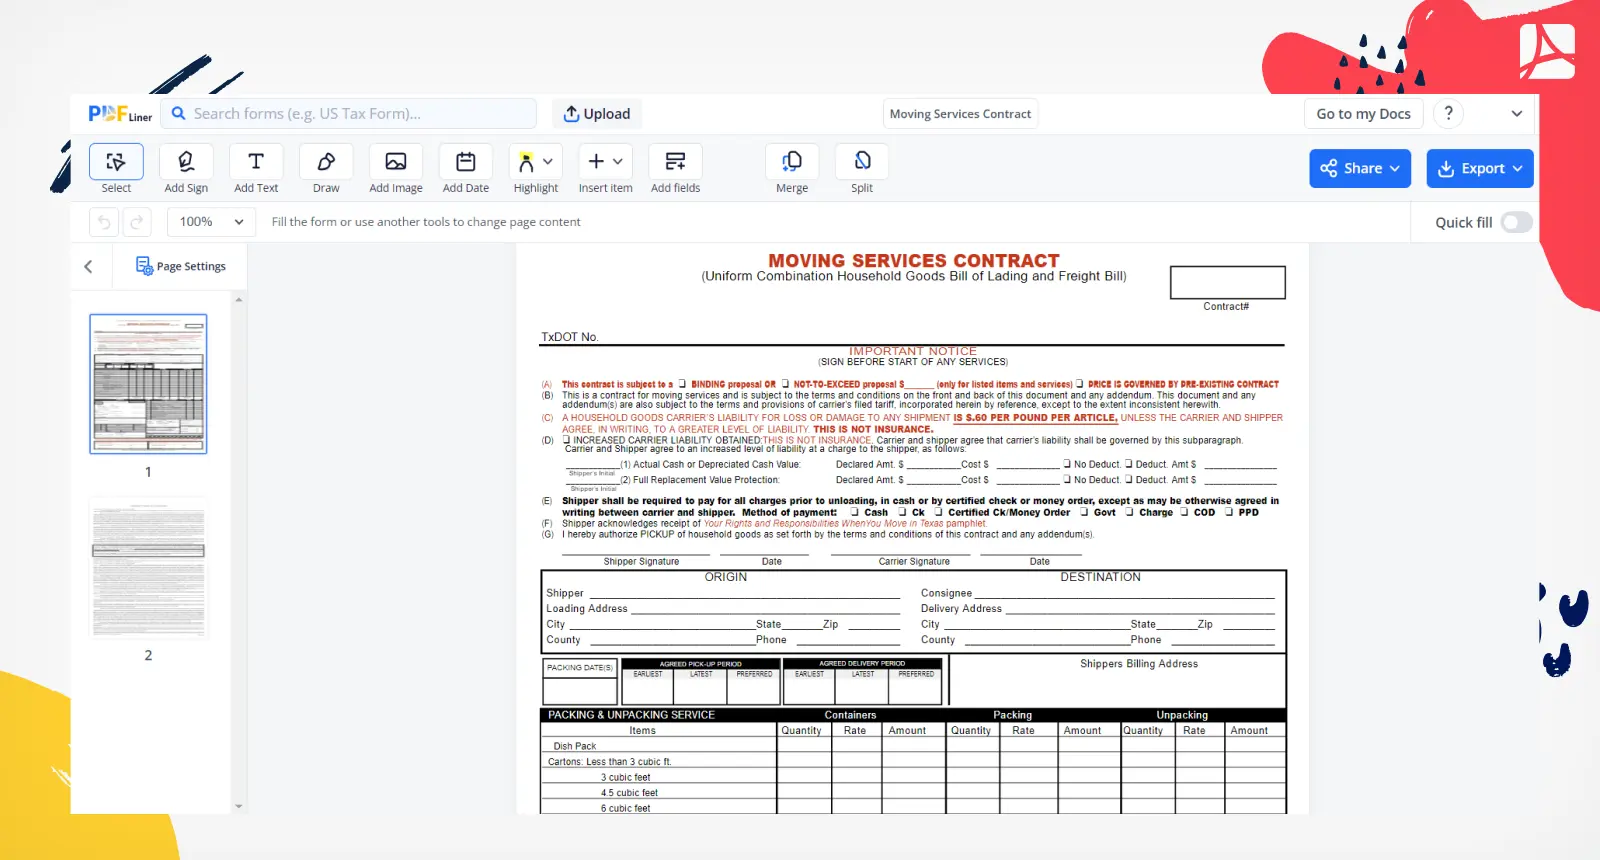 Moving Services Contract Form Screenshot